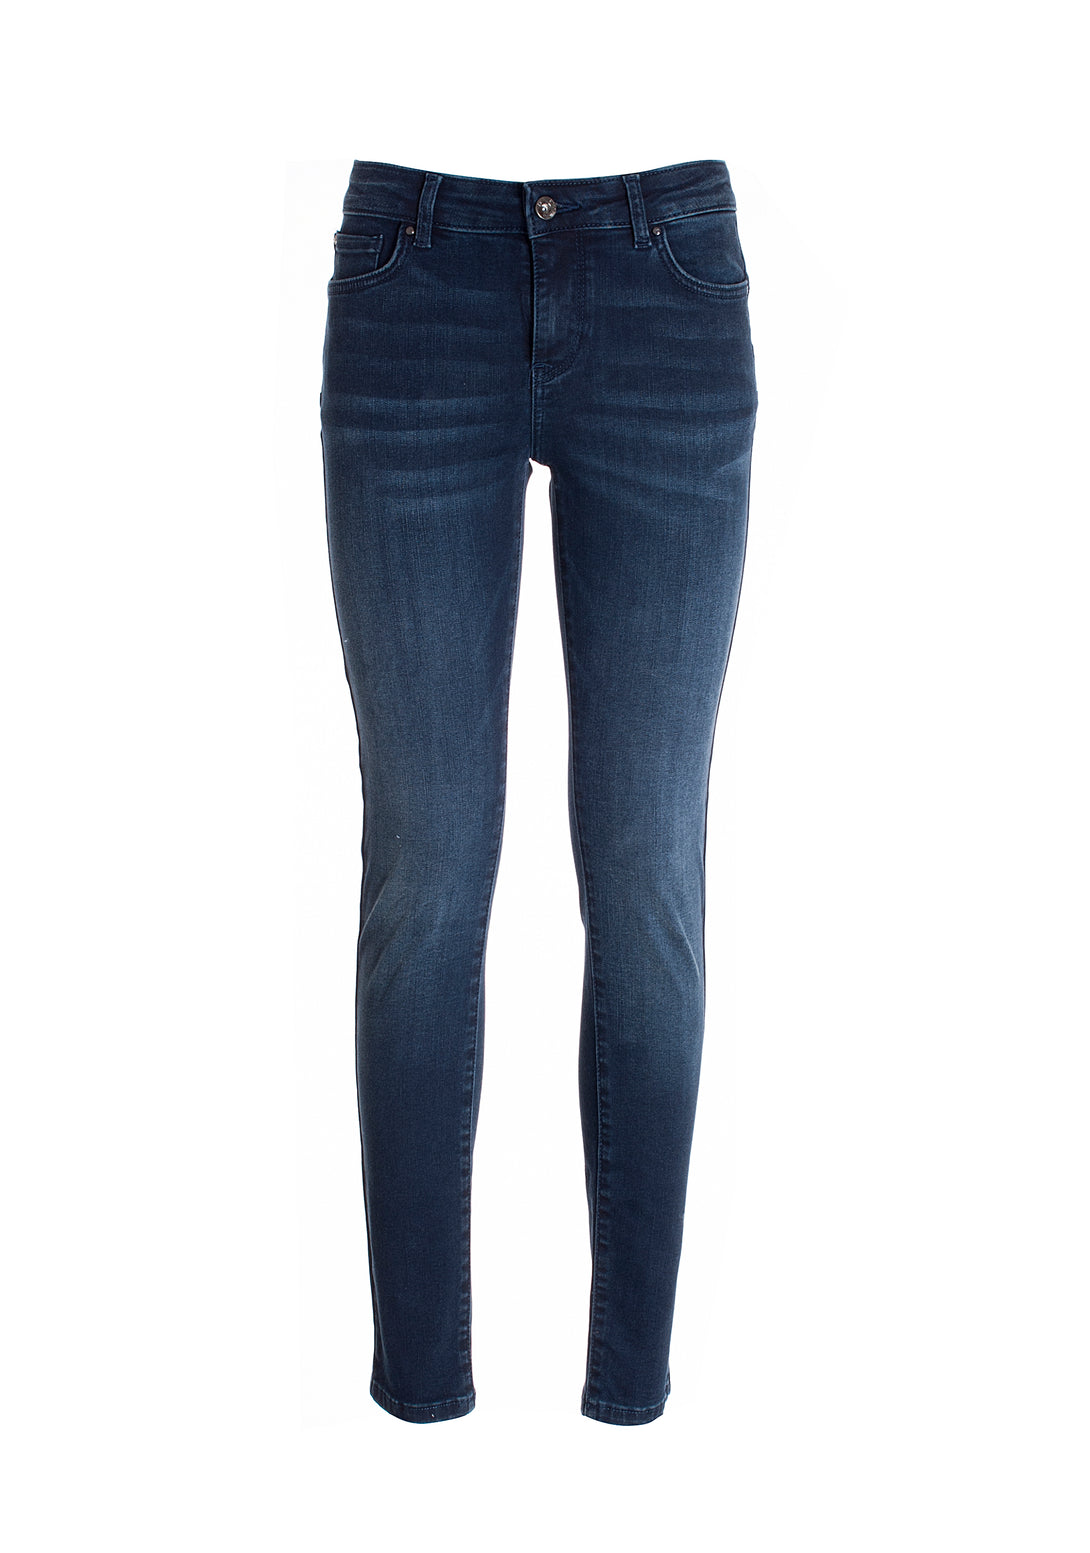 Jeans cropped push-up effect made in denim with dark wash